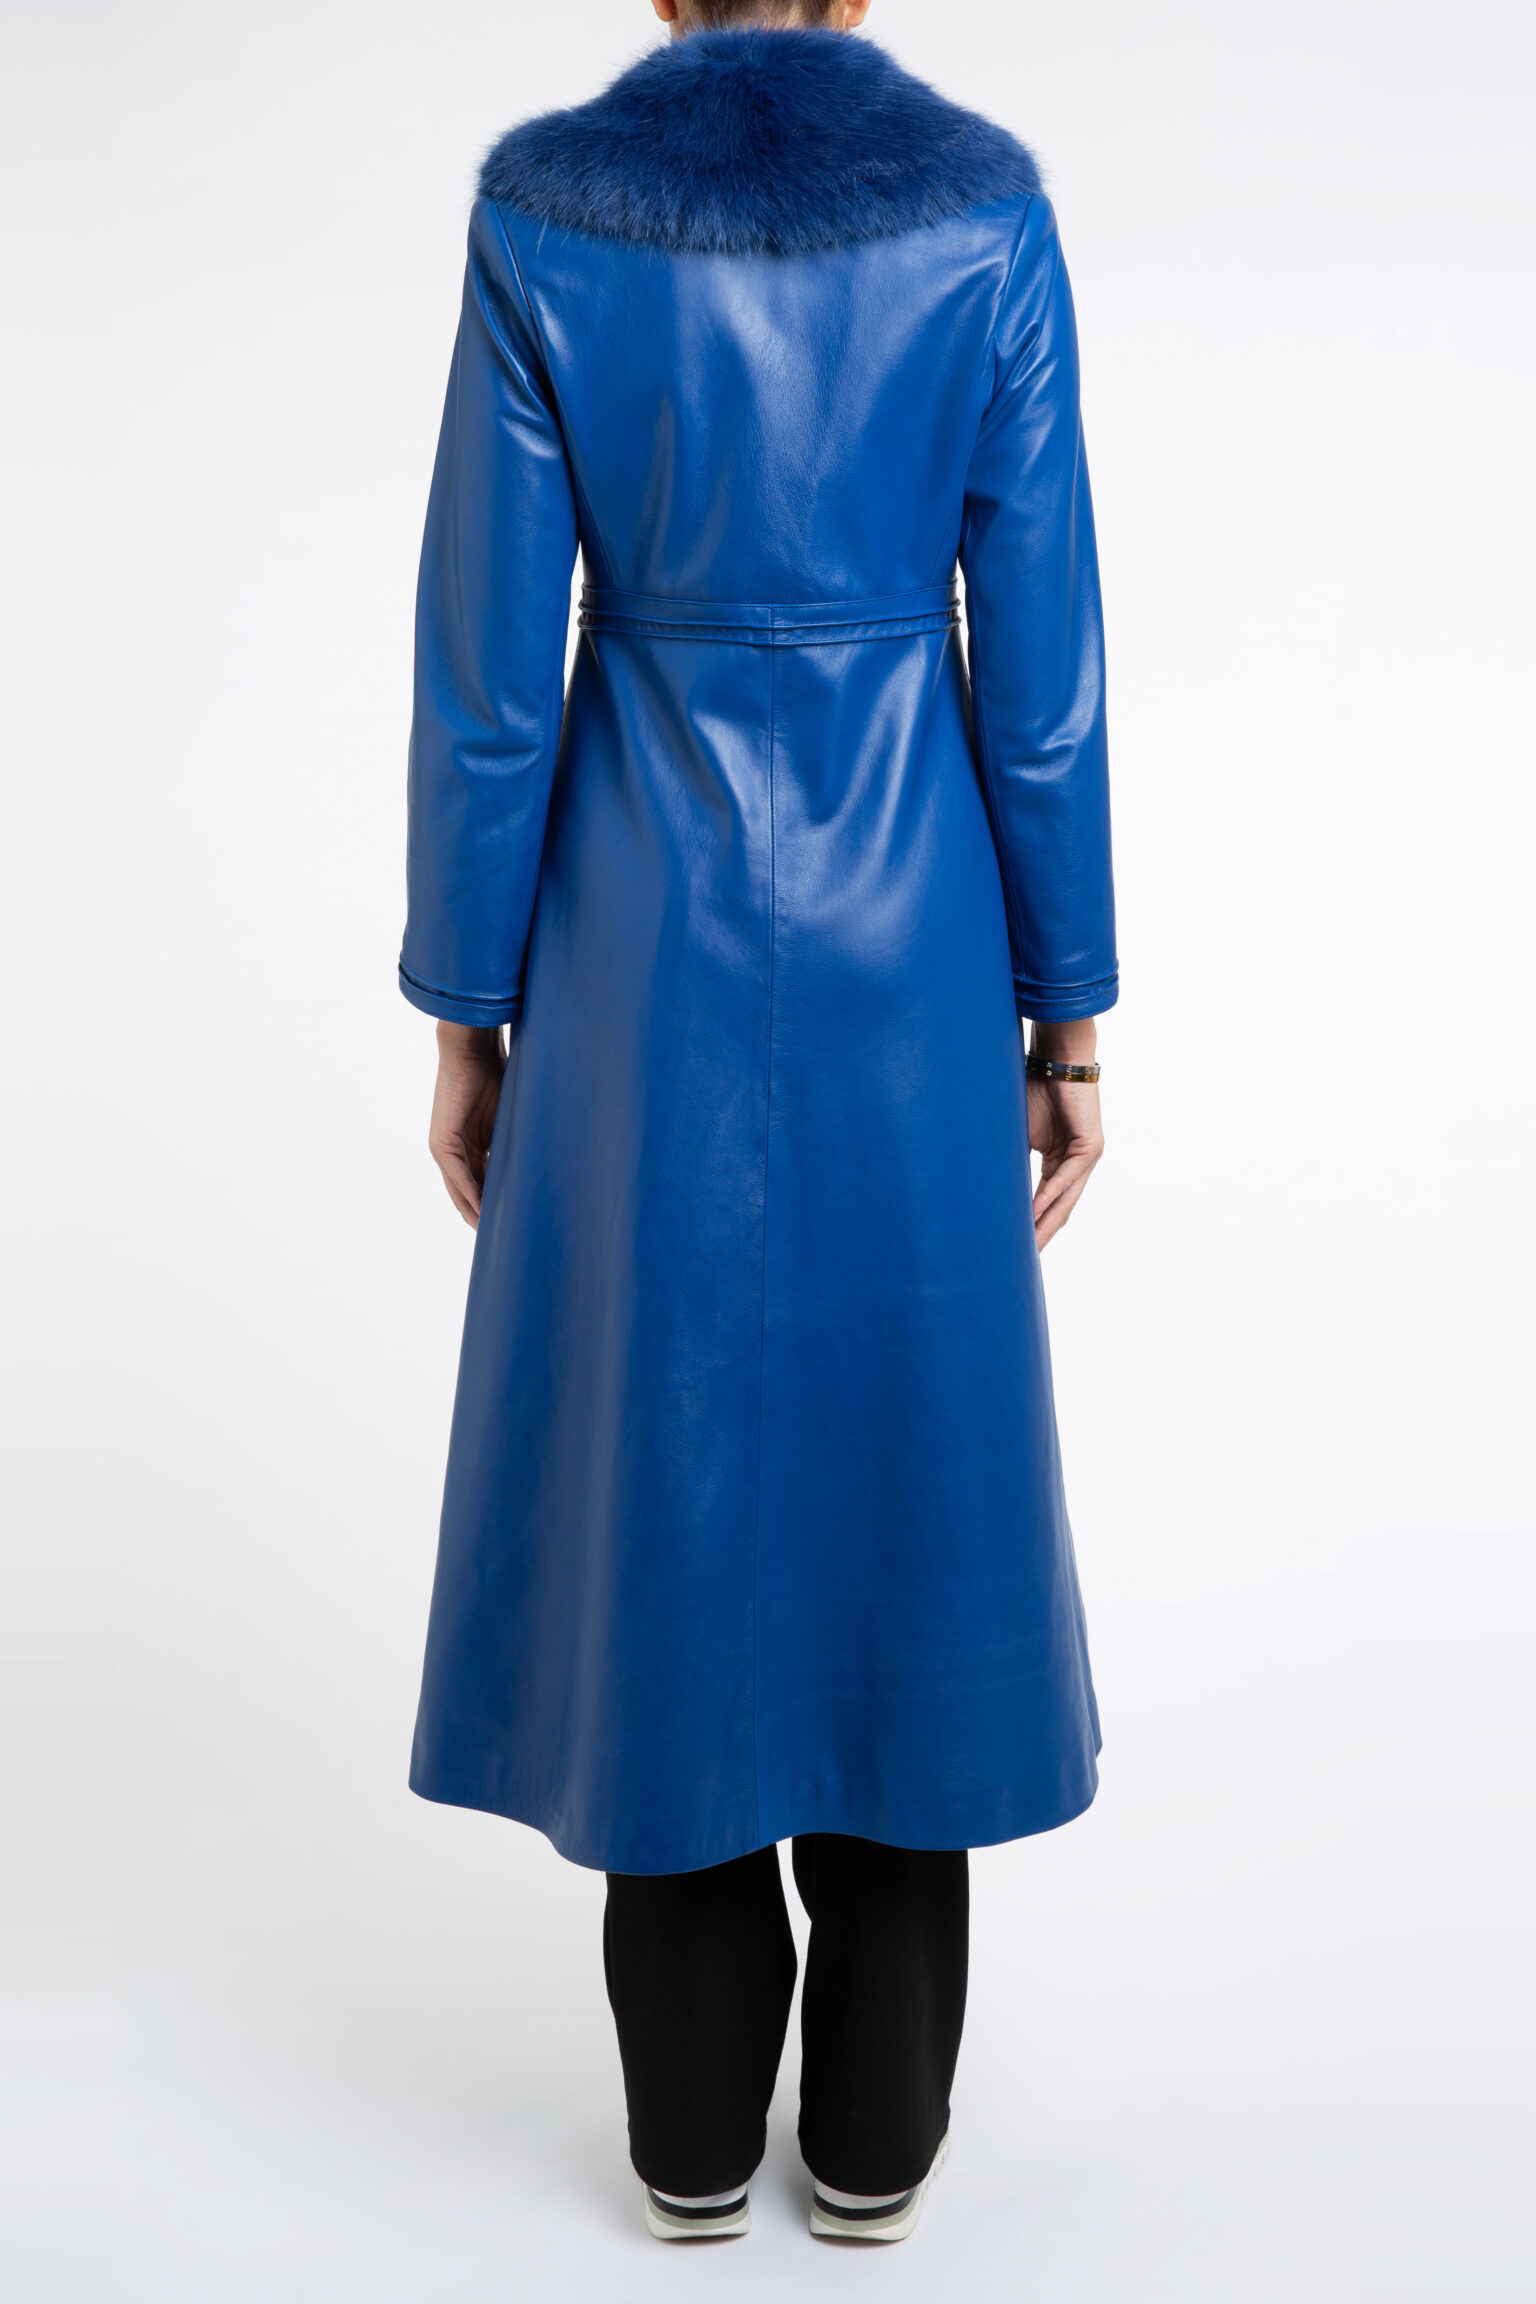 Edward Leather Trench Coat in Blue - SOLD OUT